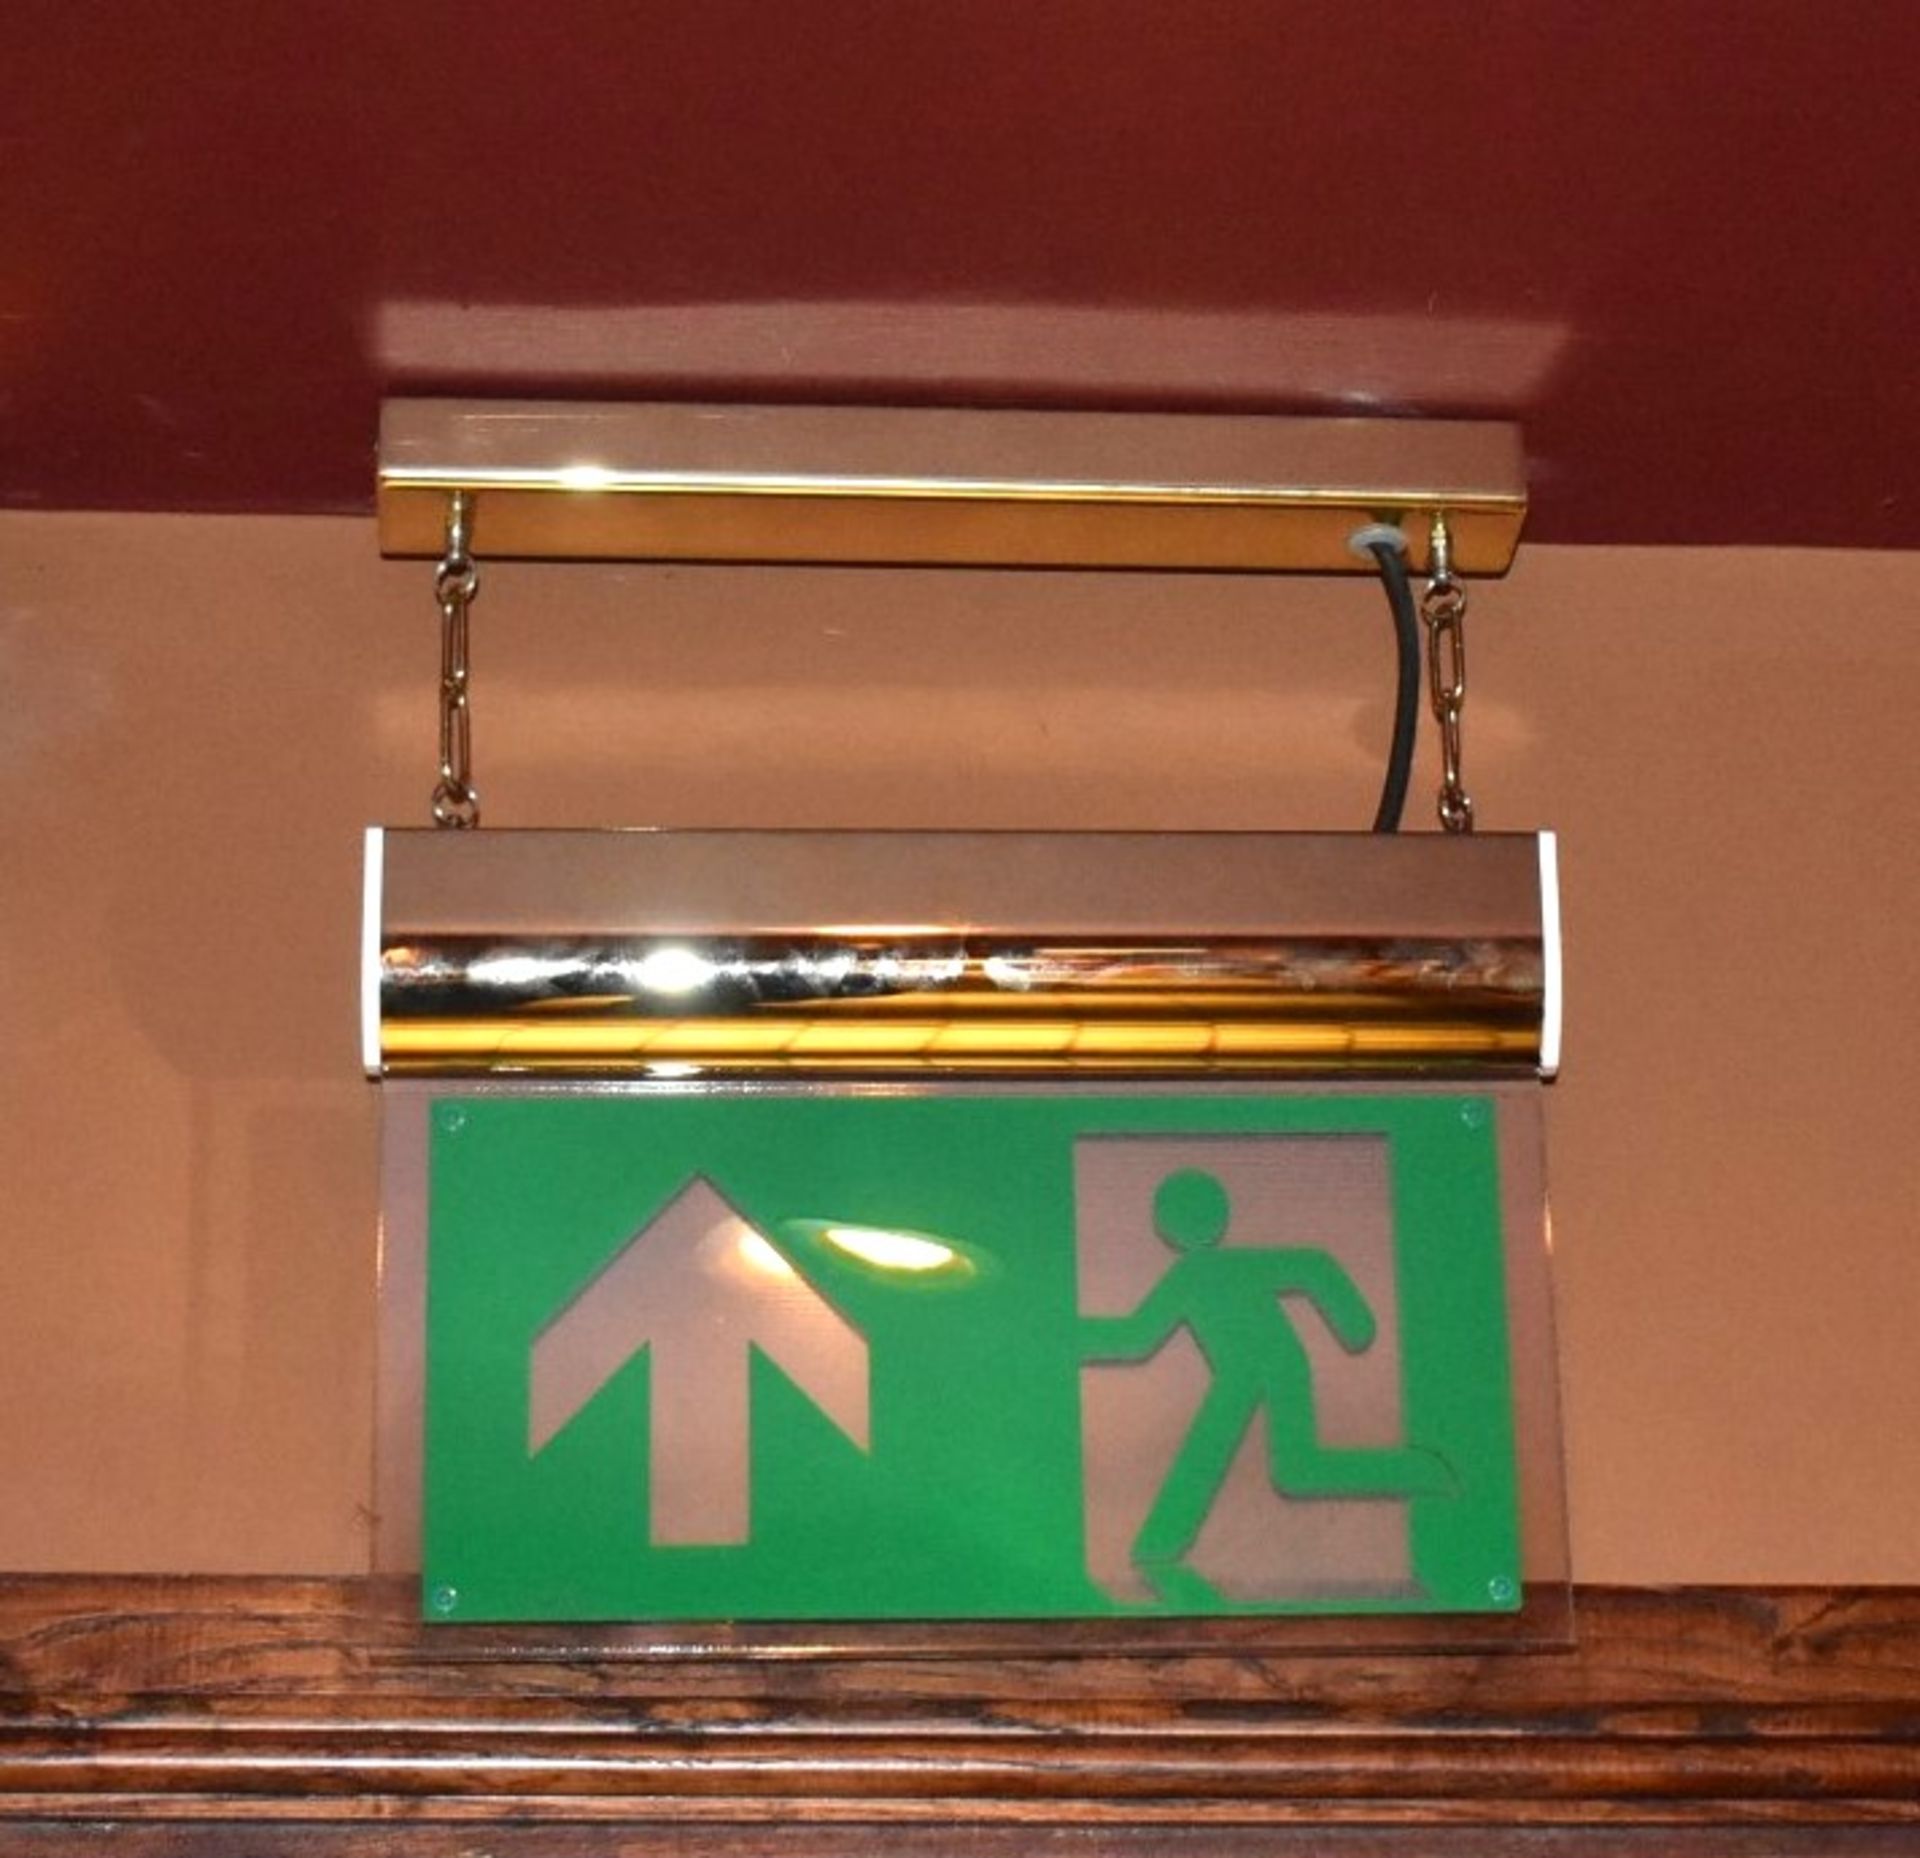 3 x Illuminated Fire Escape Signs With Brass Ceiling Fixtures - Image 4 of 4